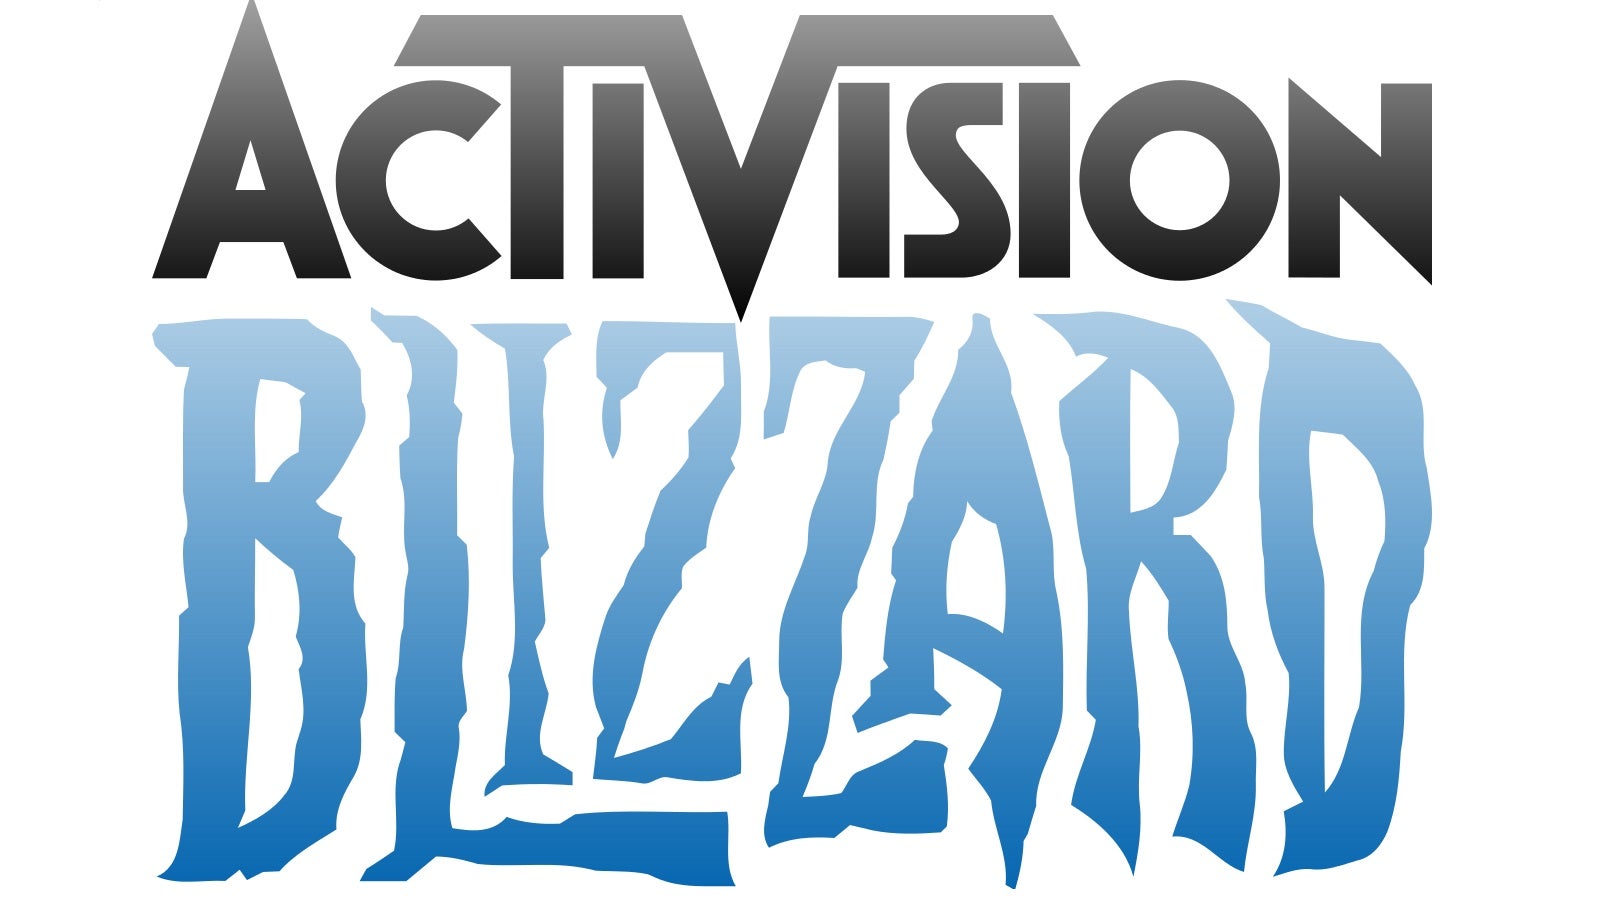 Image for Activision Blizzard CEO Bobby Kotick is re-elected to the board for another year